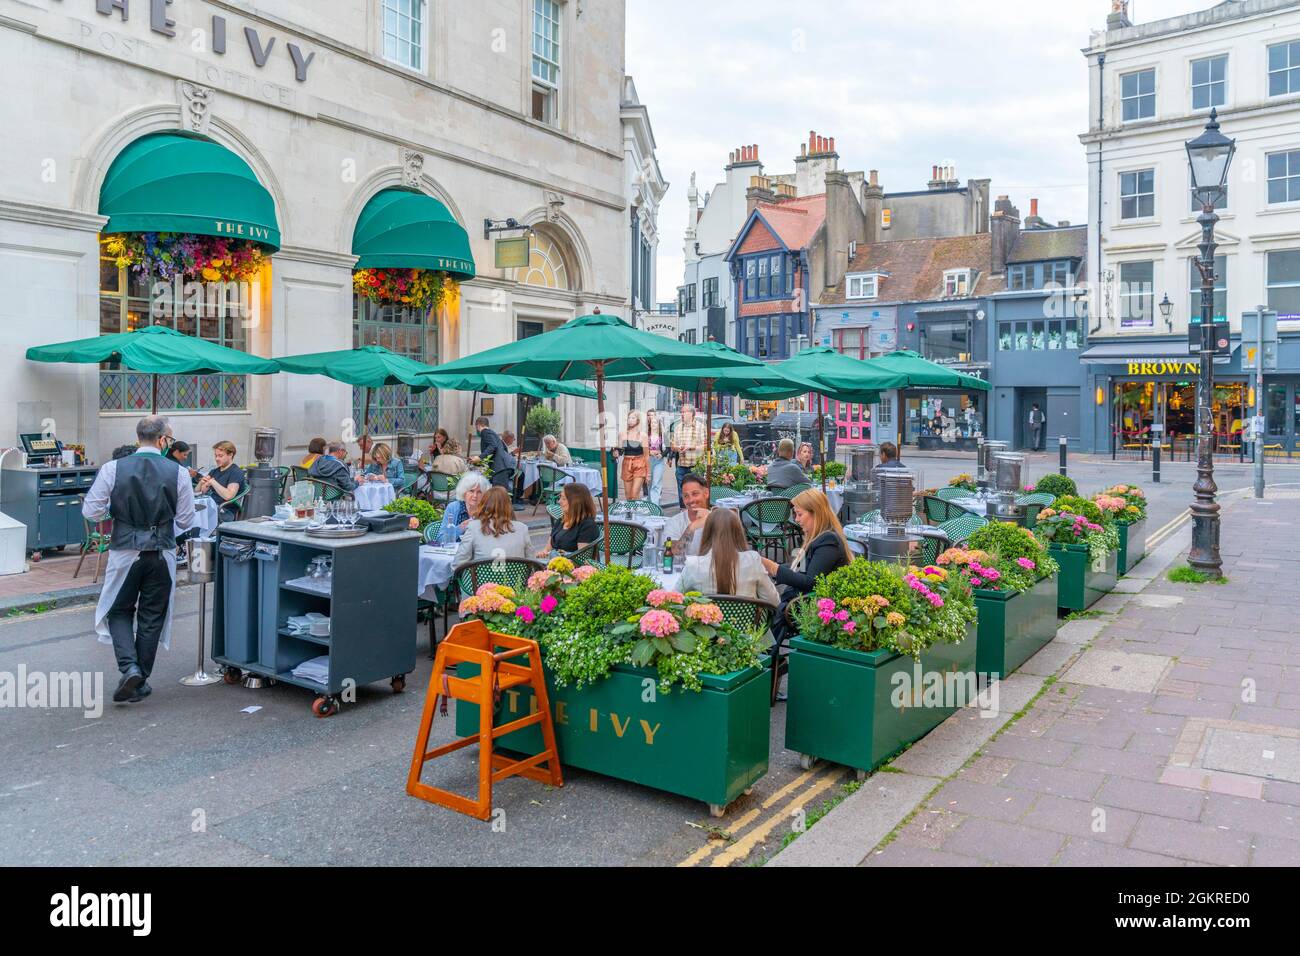 View of The Ivy Restaurant, Alfresco dining in The Lanes at dusk, Brighton, Sussex, England, United Kingdom, Europe Stock Photo